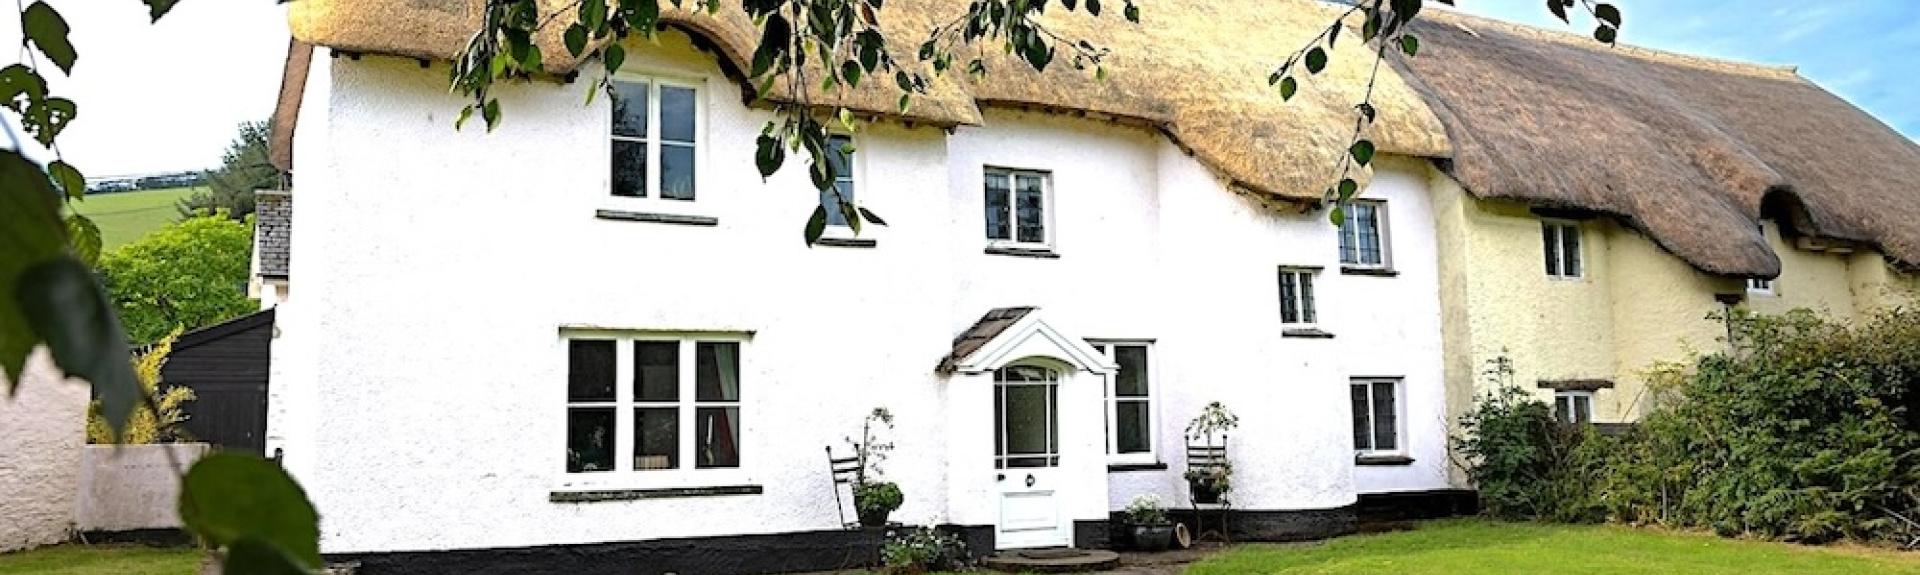 Exterior of a thatched Exmoor cottage overlooking a large lawn.